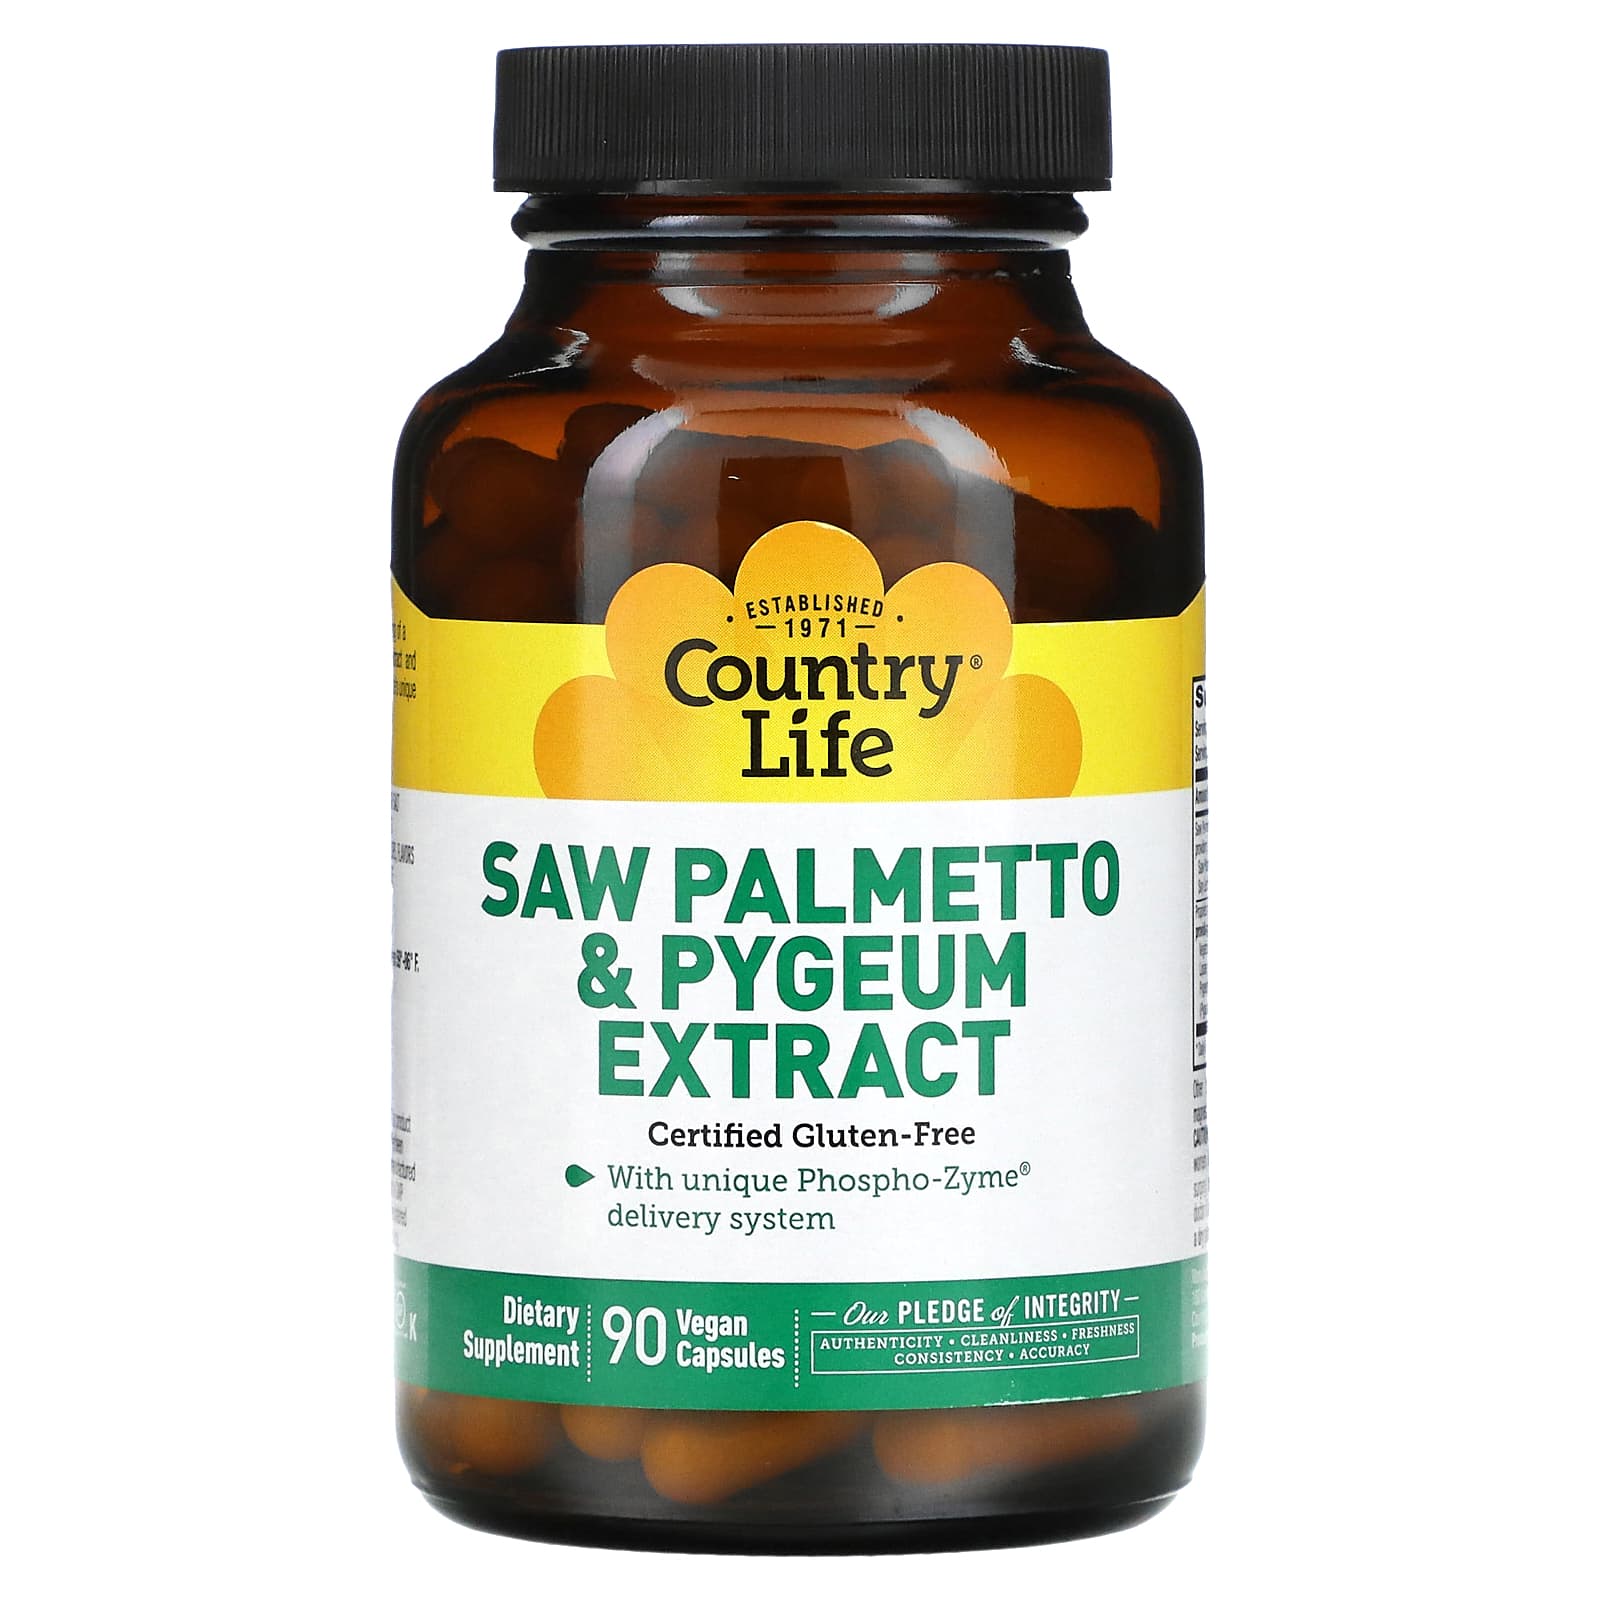 Country Life Saw Palmetto & Pygeum Extract, 90 Vegan Capsules